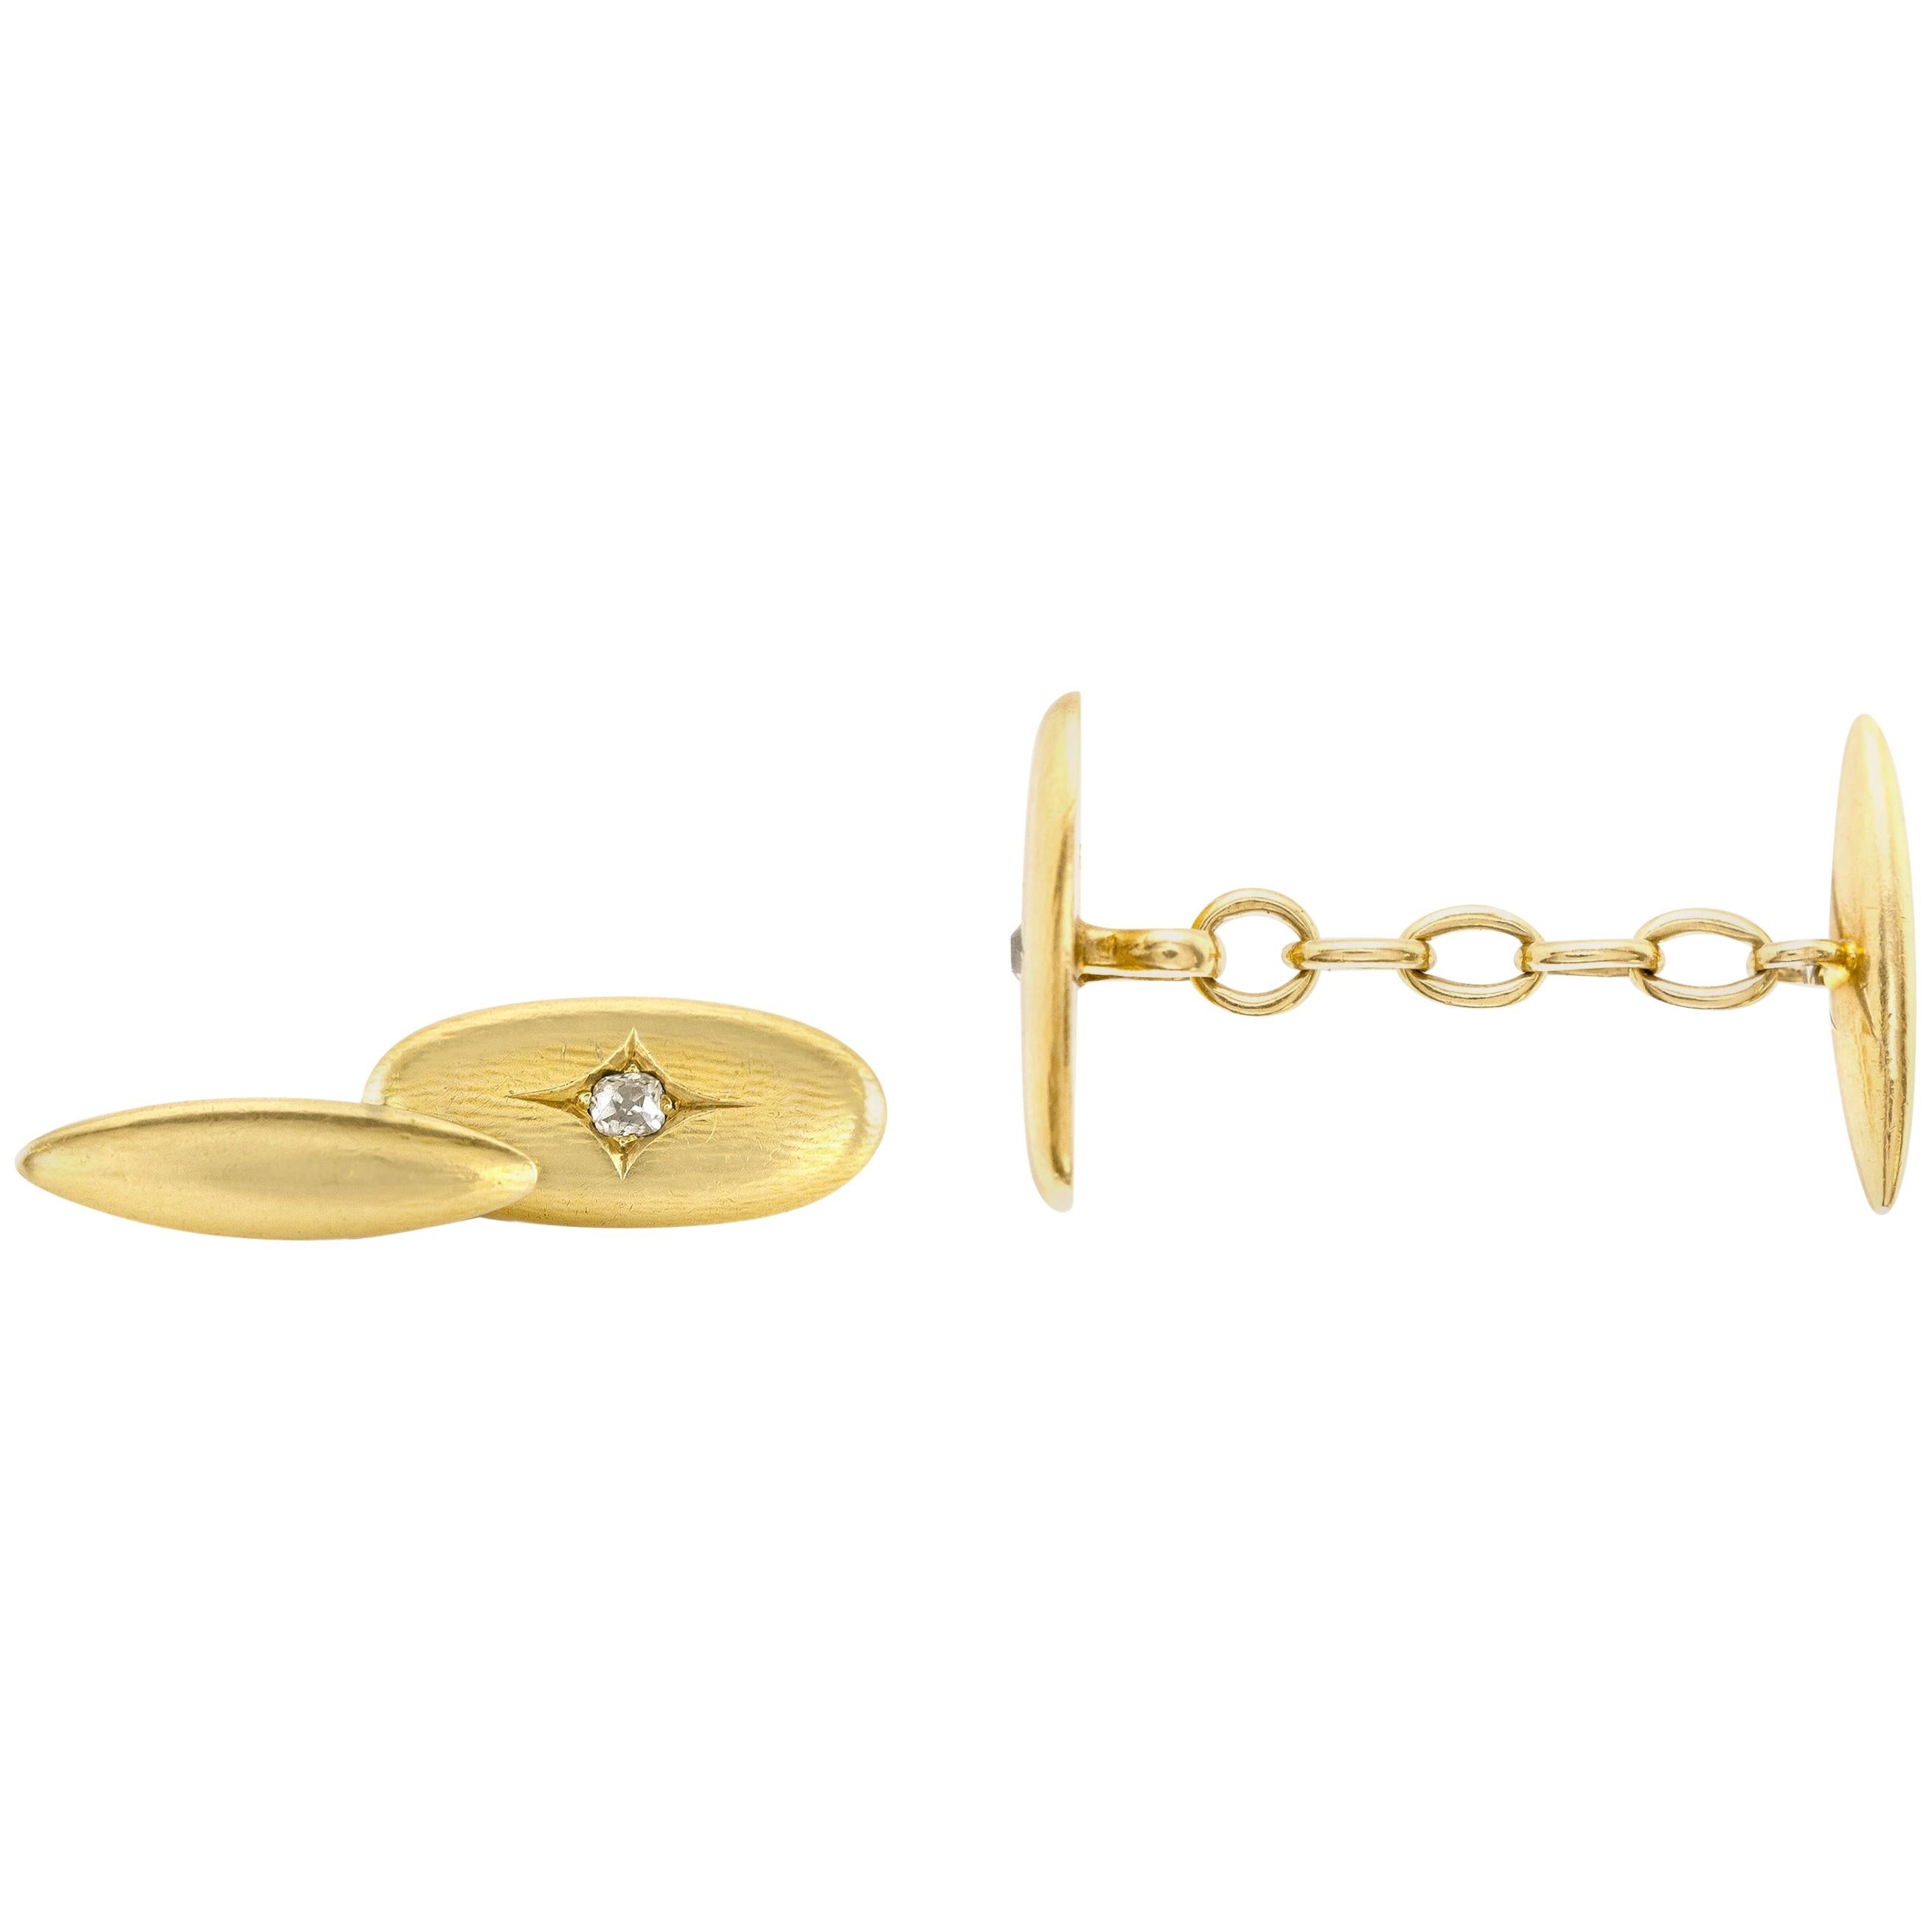 Oval Gold Cufflinks with Diamond For Sale